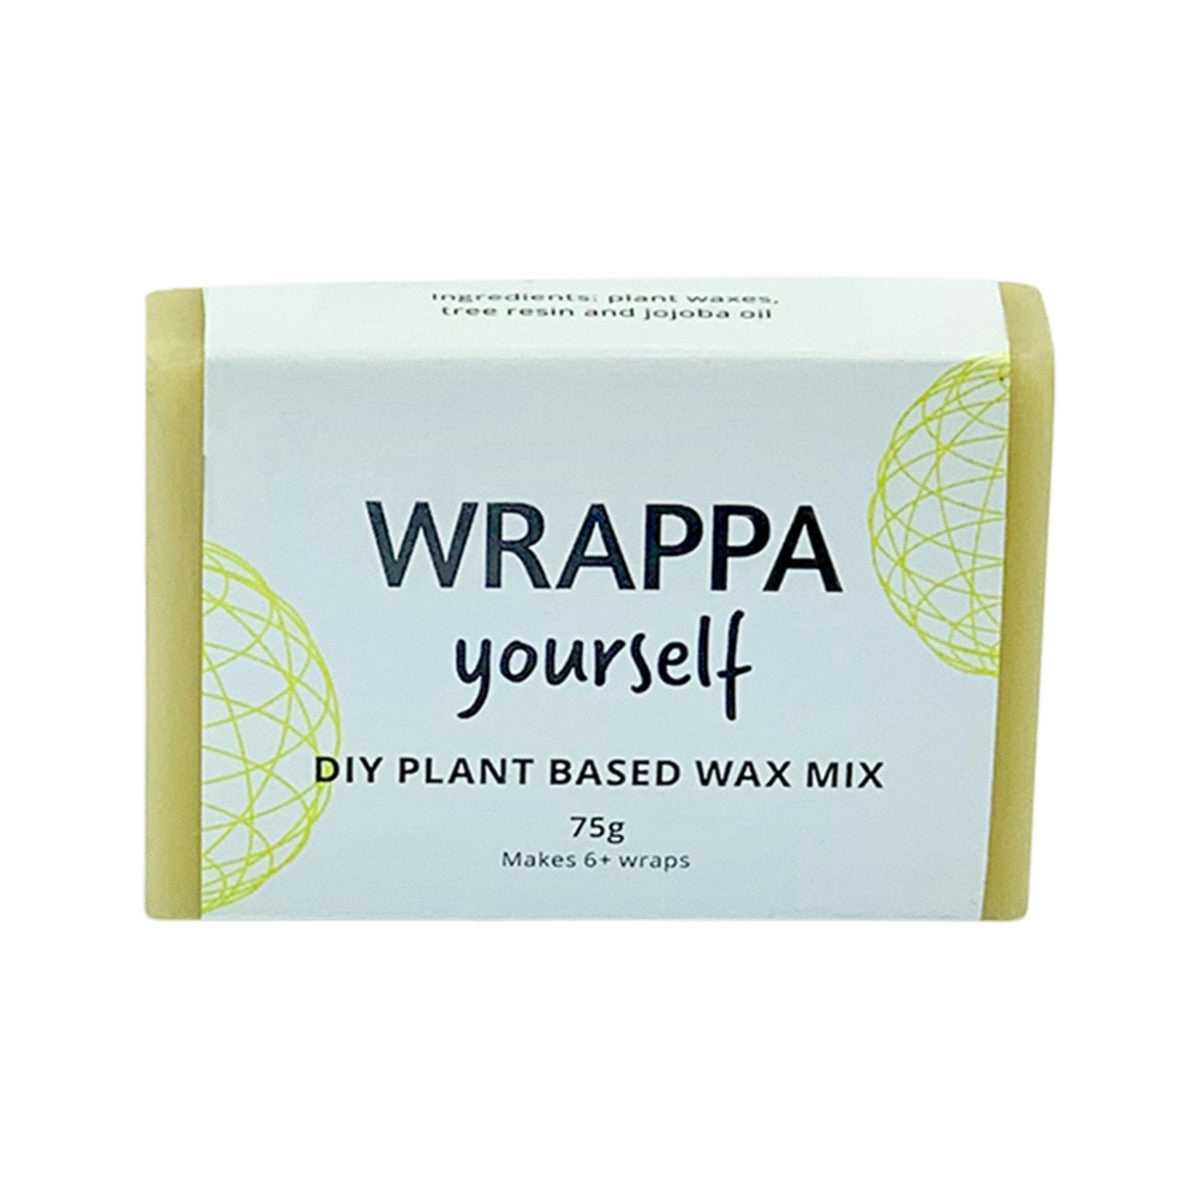 image of WRAPPA Yourself (DIY Wax Mix) Plant Based Vegan 75g on white background 